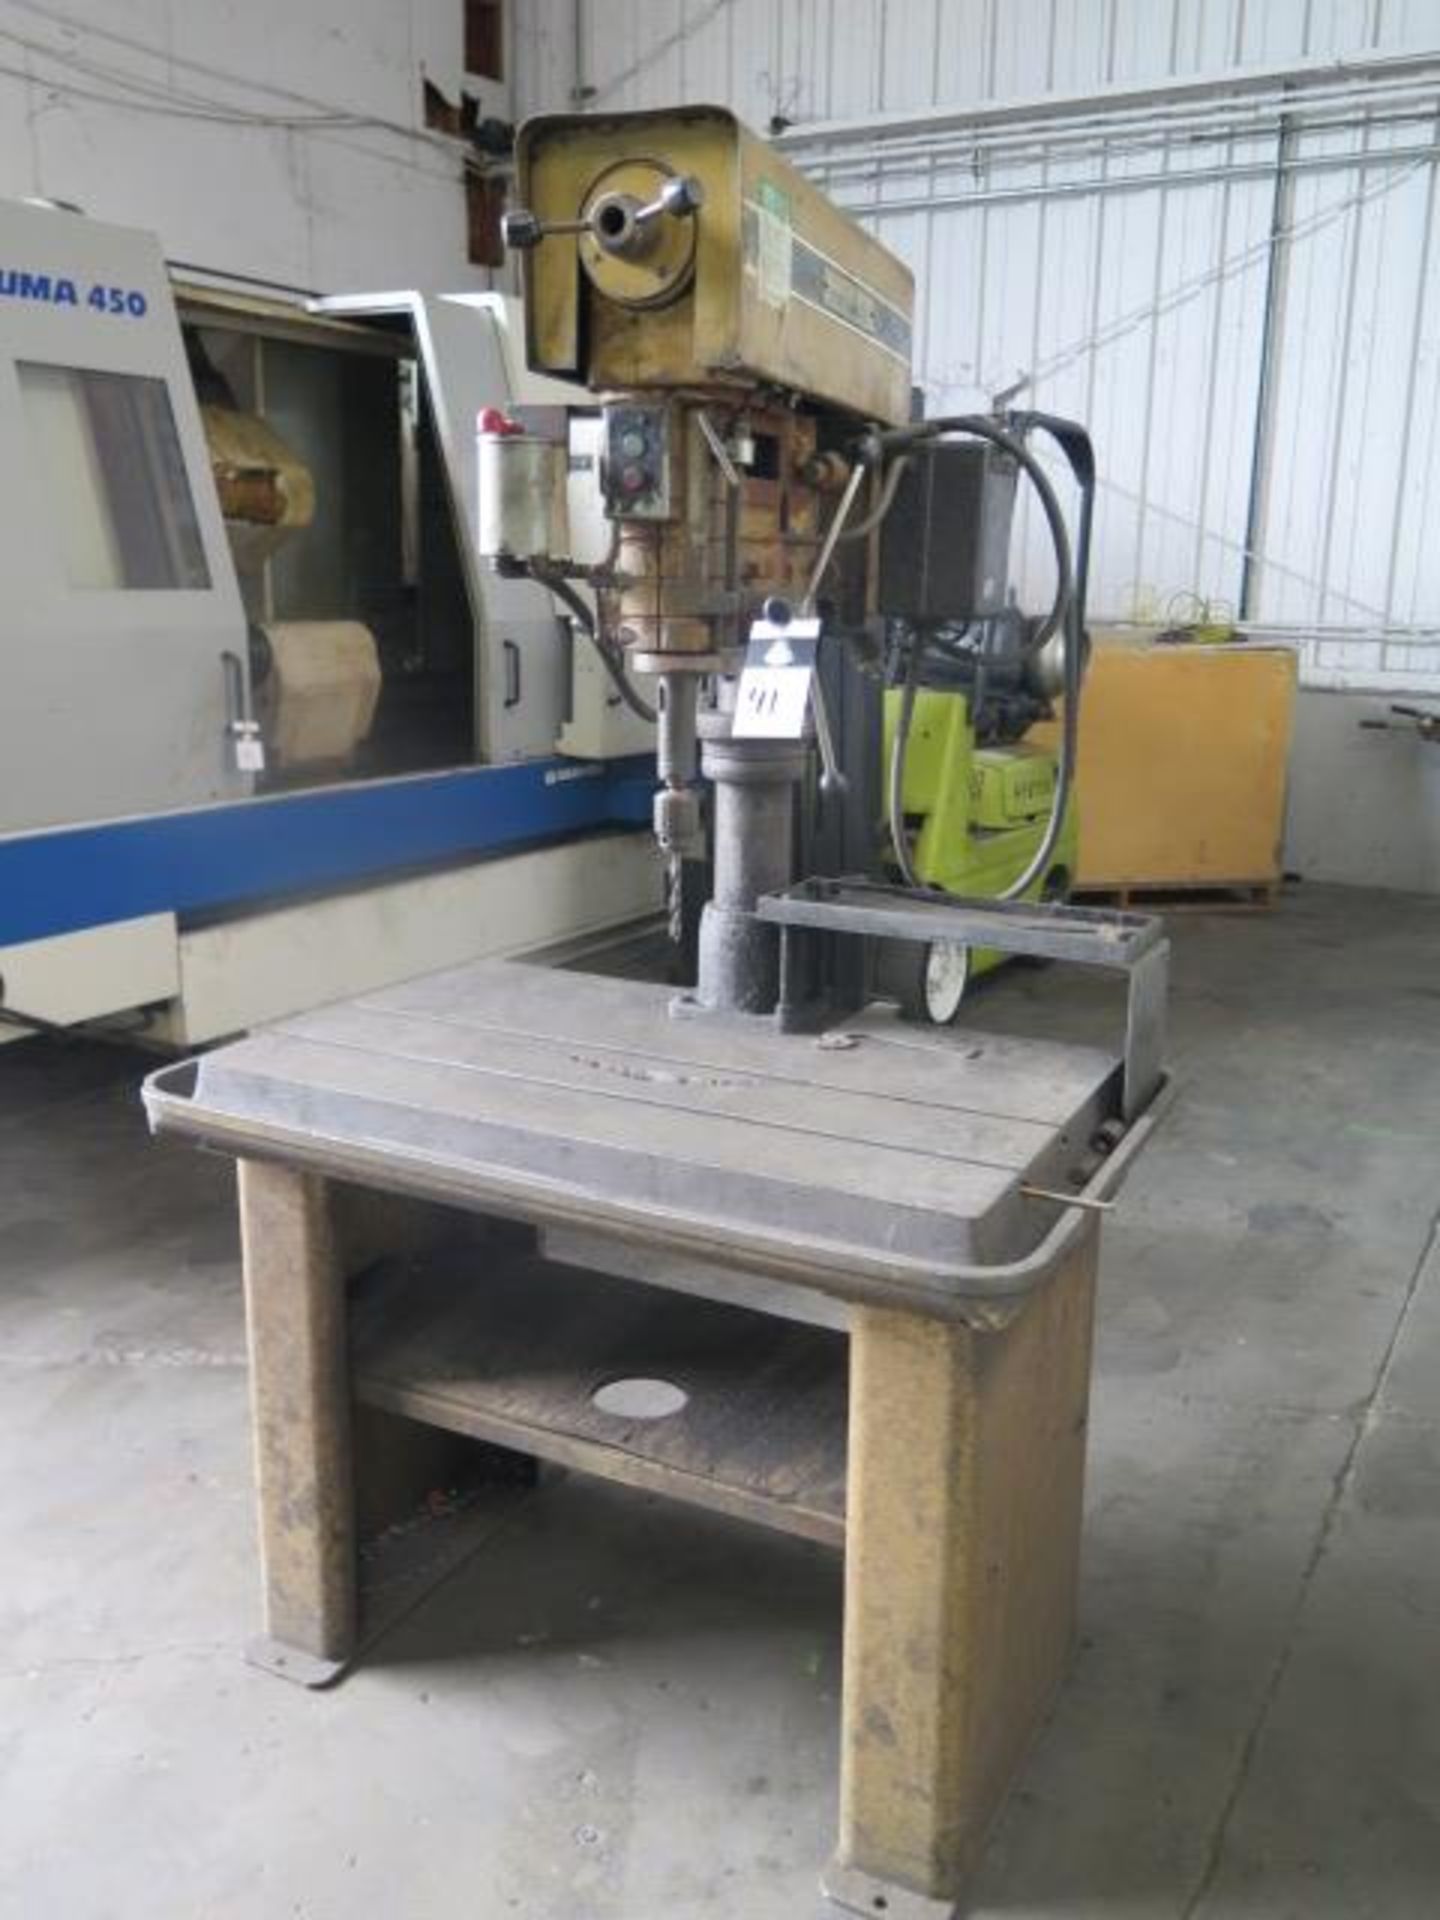 Powermatic Variable Speed Drill Press w/ 24” x 40” Table (SOLD AS-IS - NO WARRANTY) - Image 3 of 8